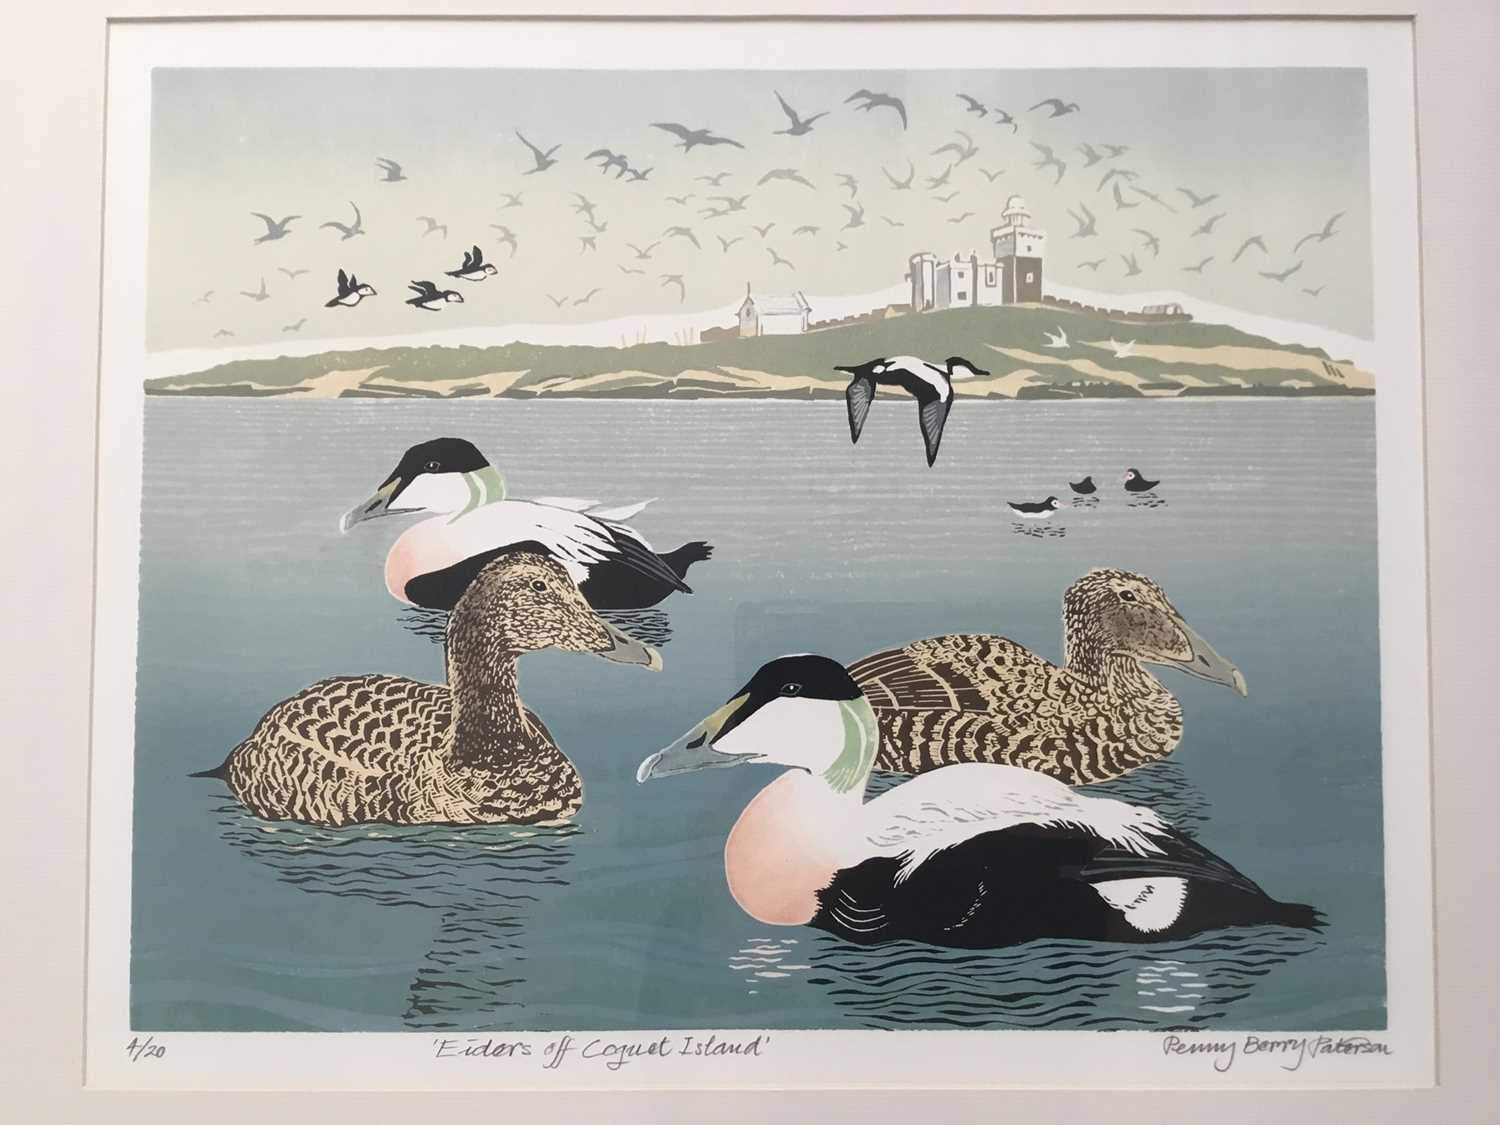 Lot 117 - Penny Berry Paterson (1941-2021) colour linocut, Eiders off Coguet Island, signed, titled and numbered 4/20, image 32 x 42cm, framed